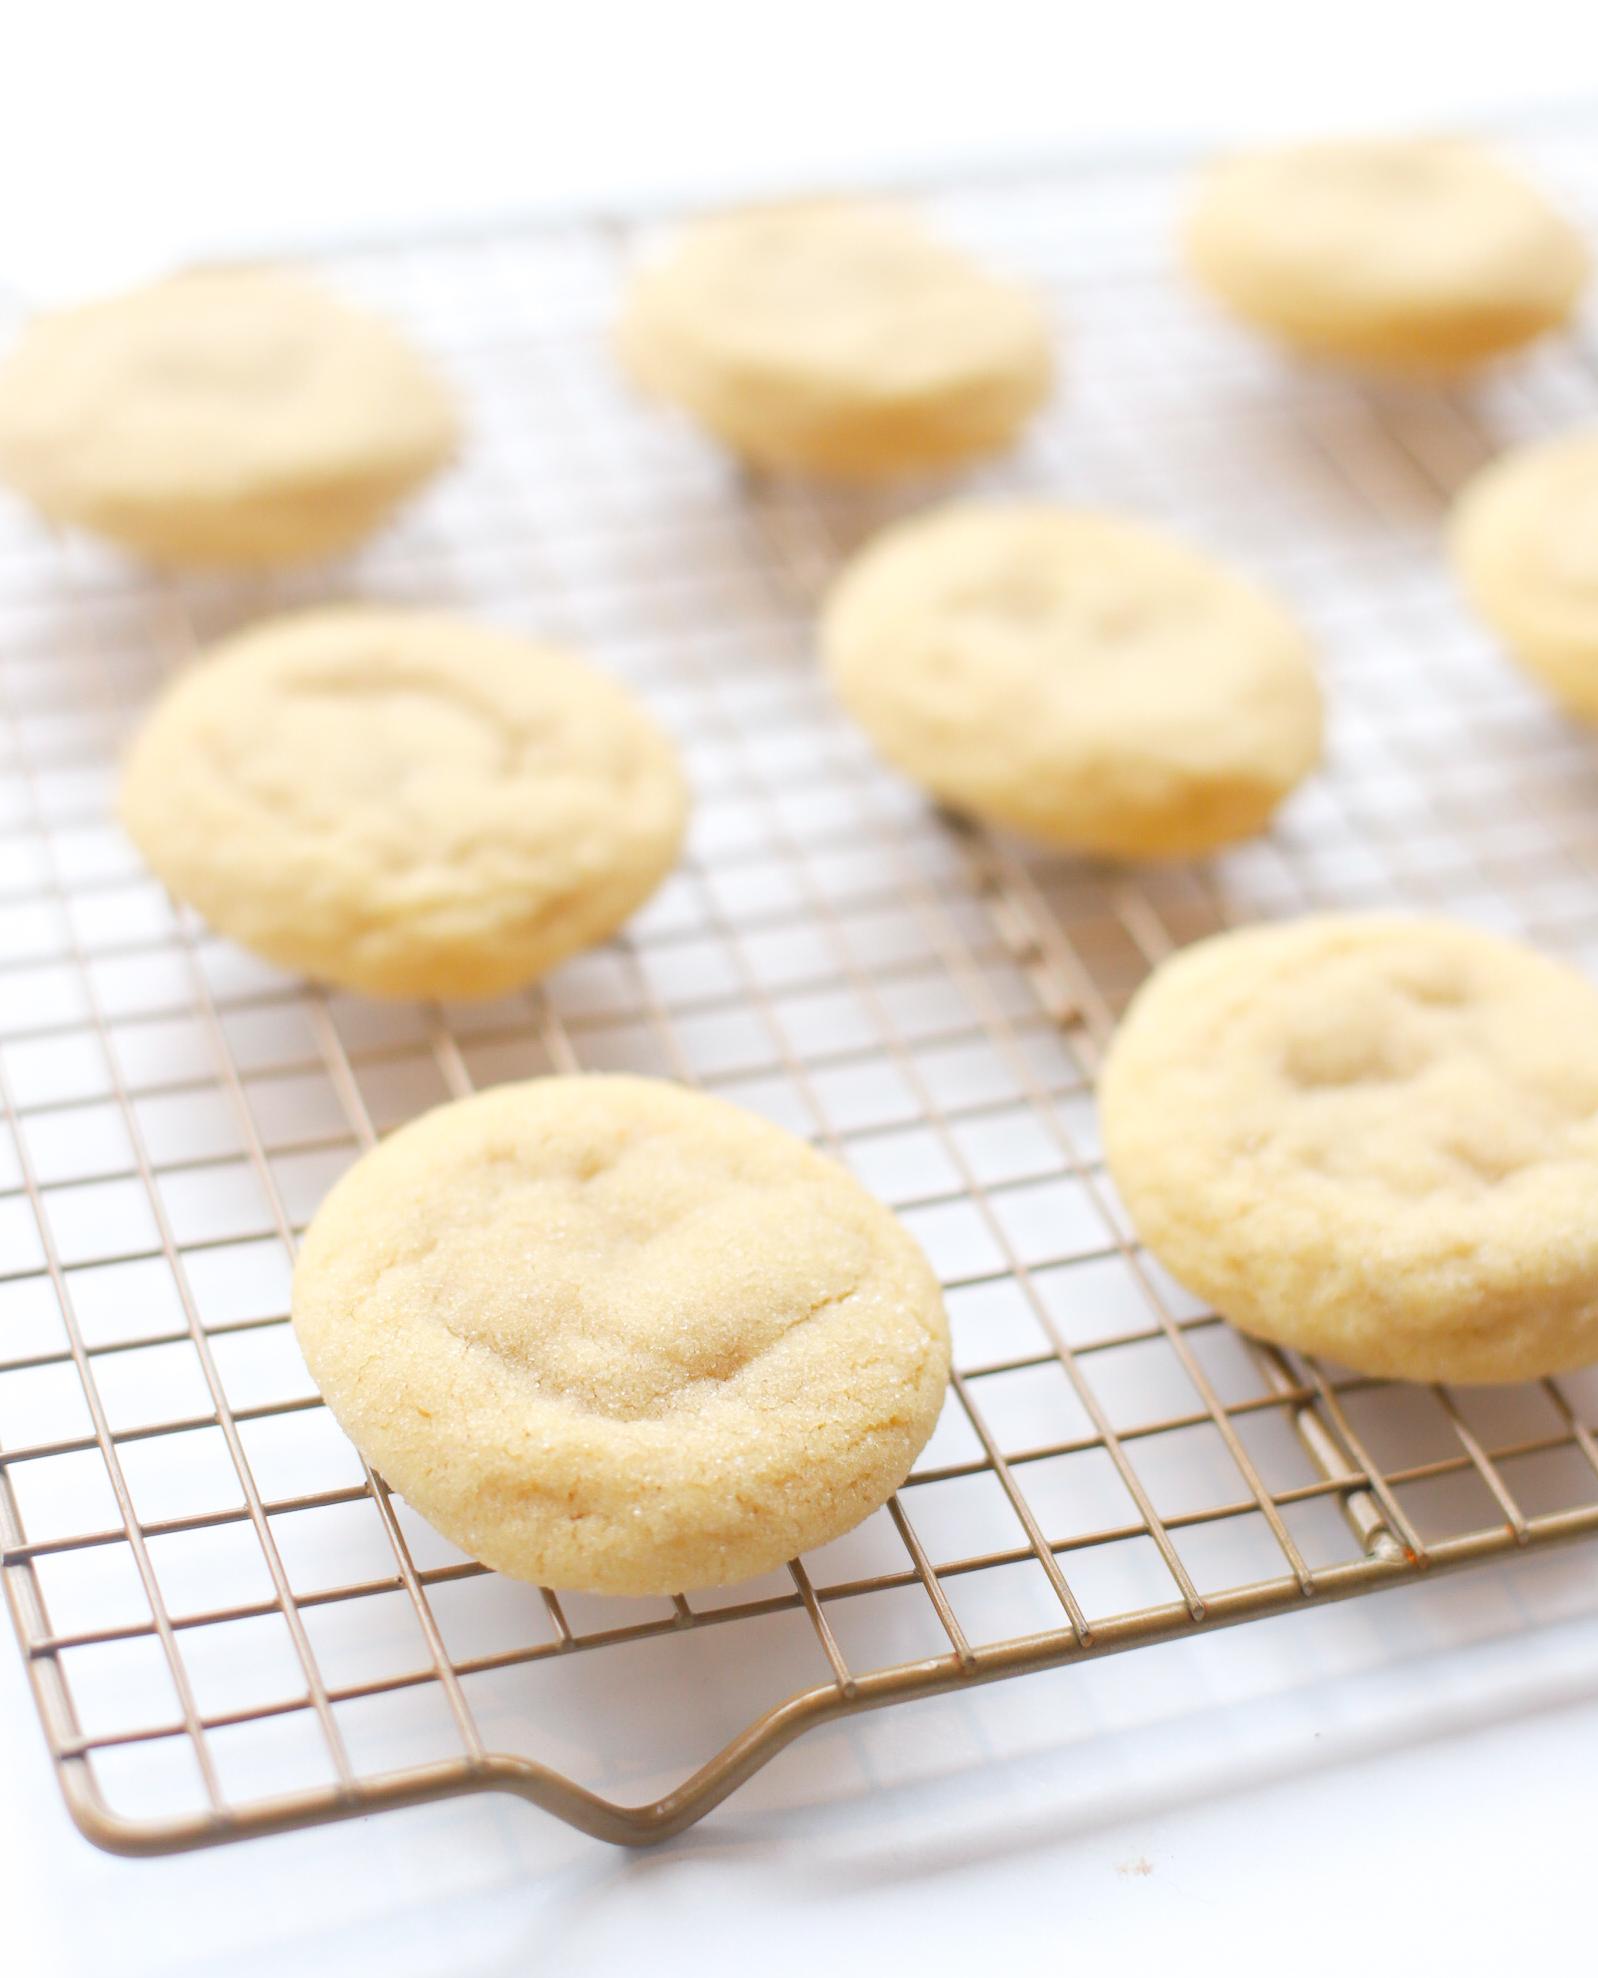  Made with only plant-based ingredients, these cookies are guilt-free indulgence at its finest.